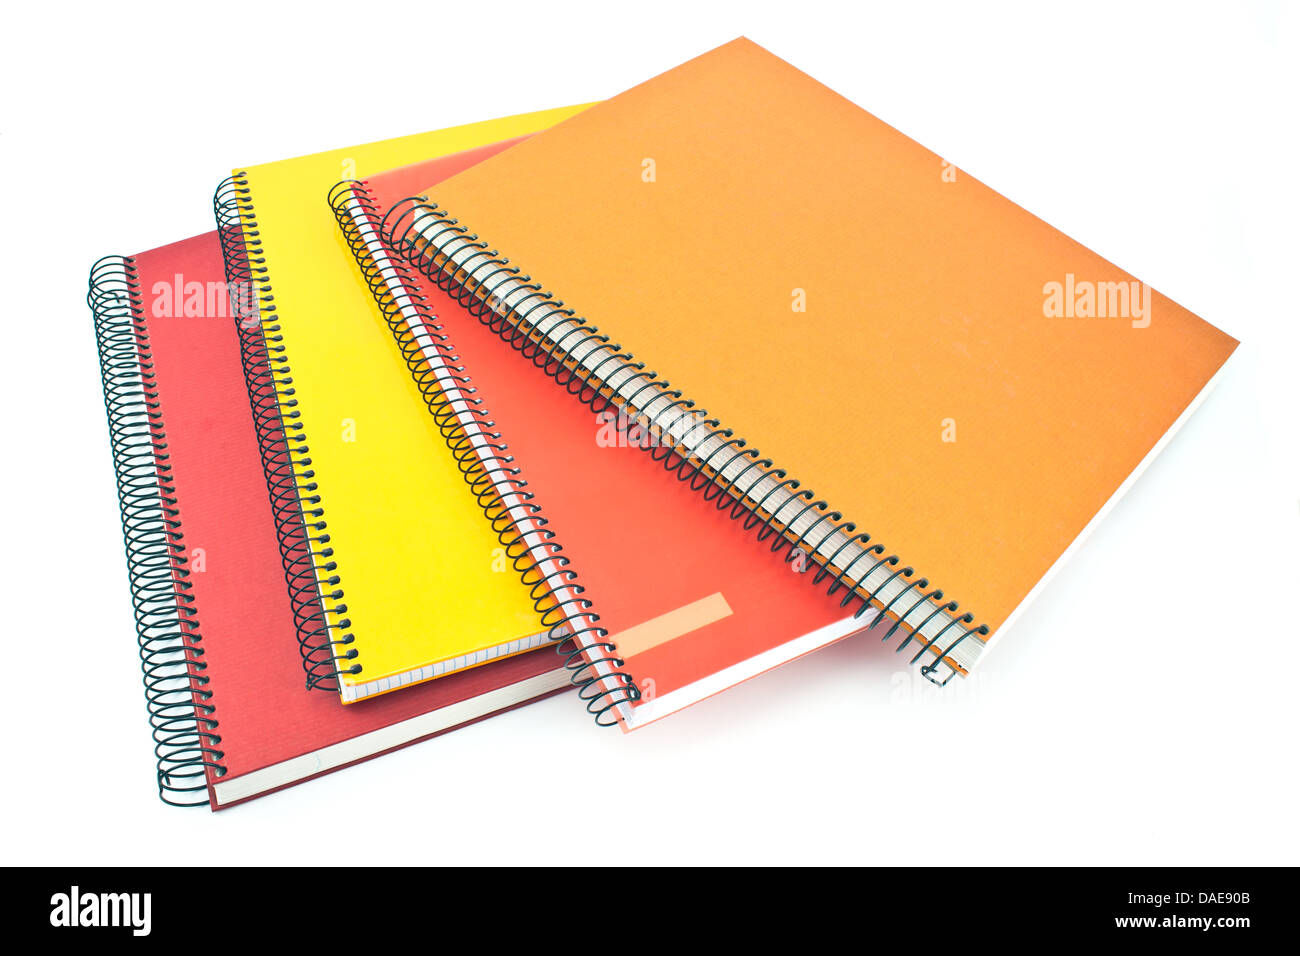 Stack of colorful spiral notebooks isolated on white Stock Photo